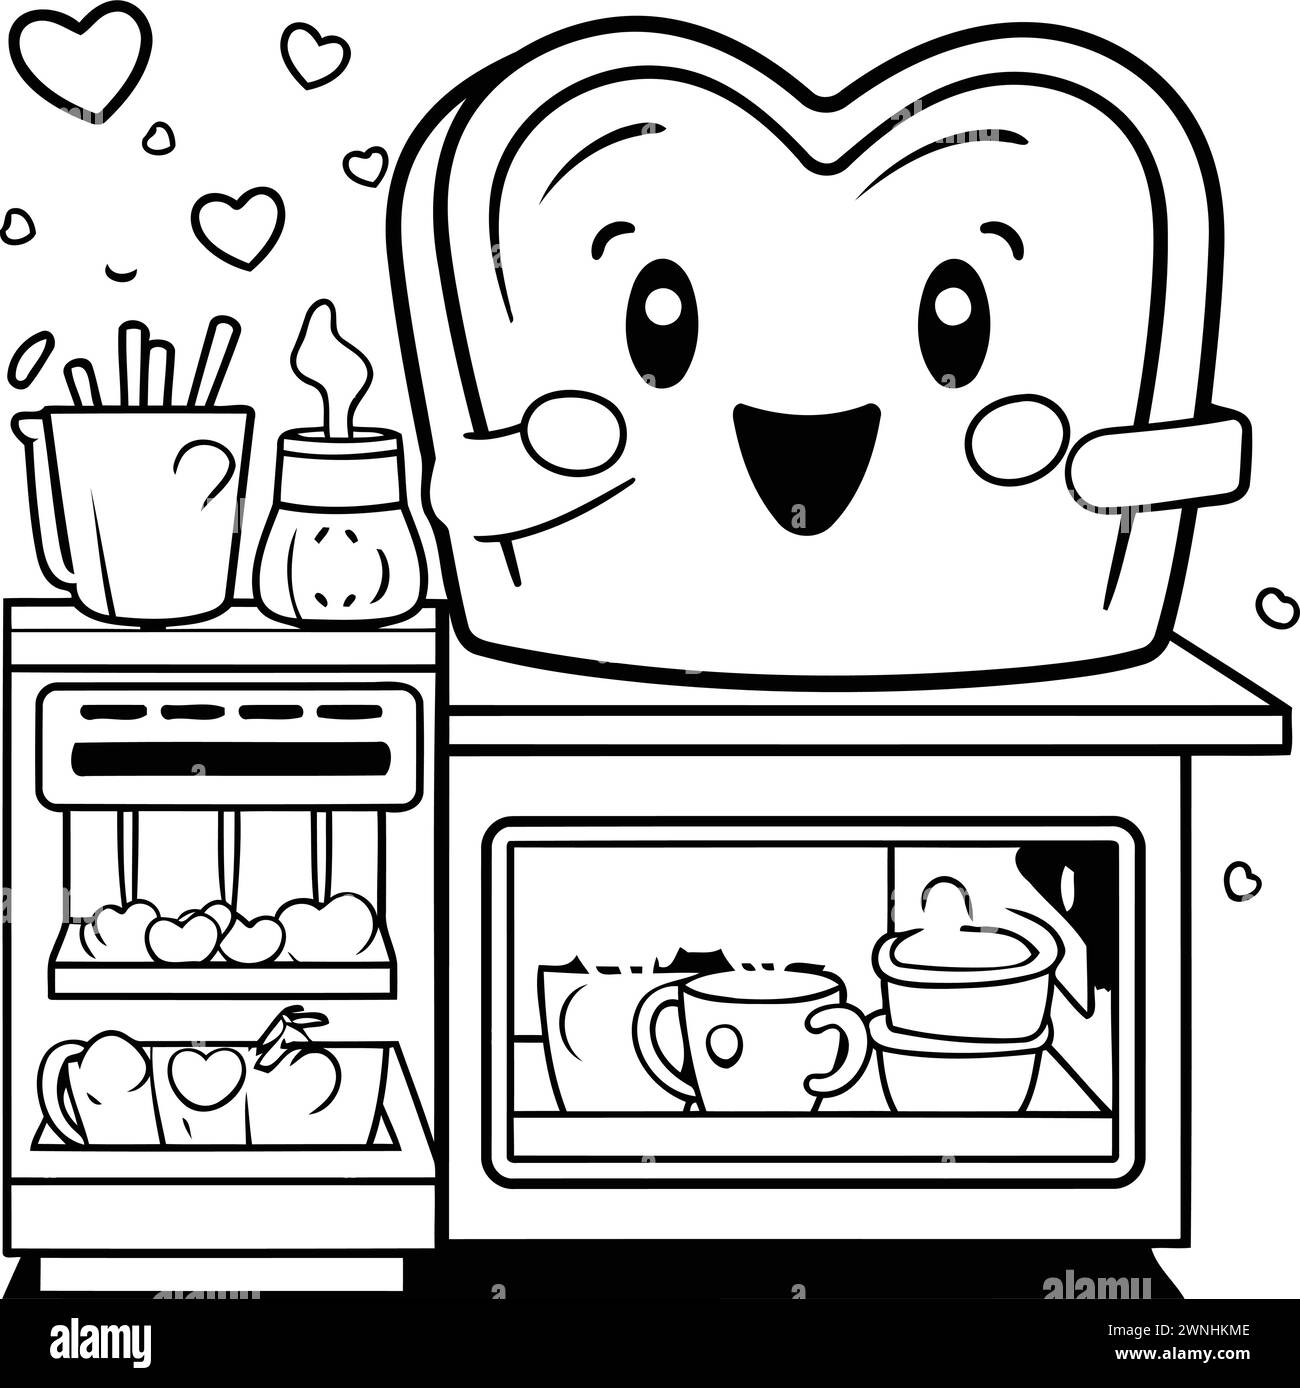 Toast in the oven. black and white vector illustration for coloring book Stock Vector